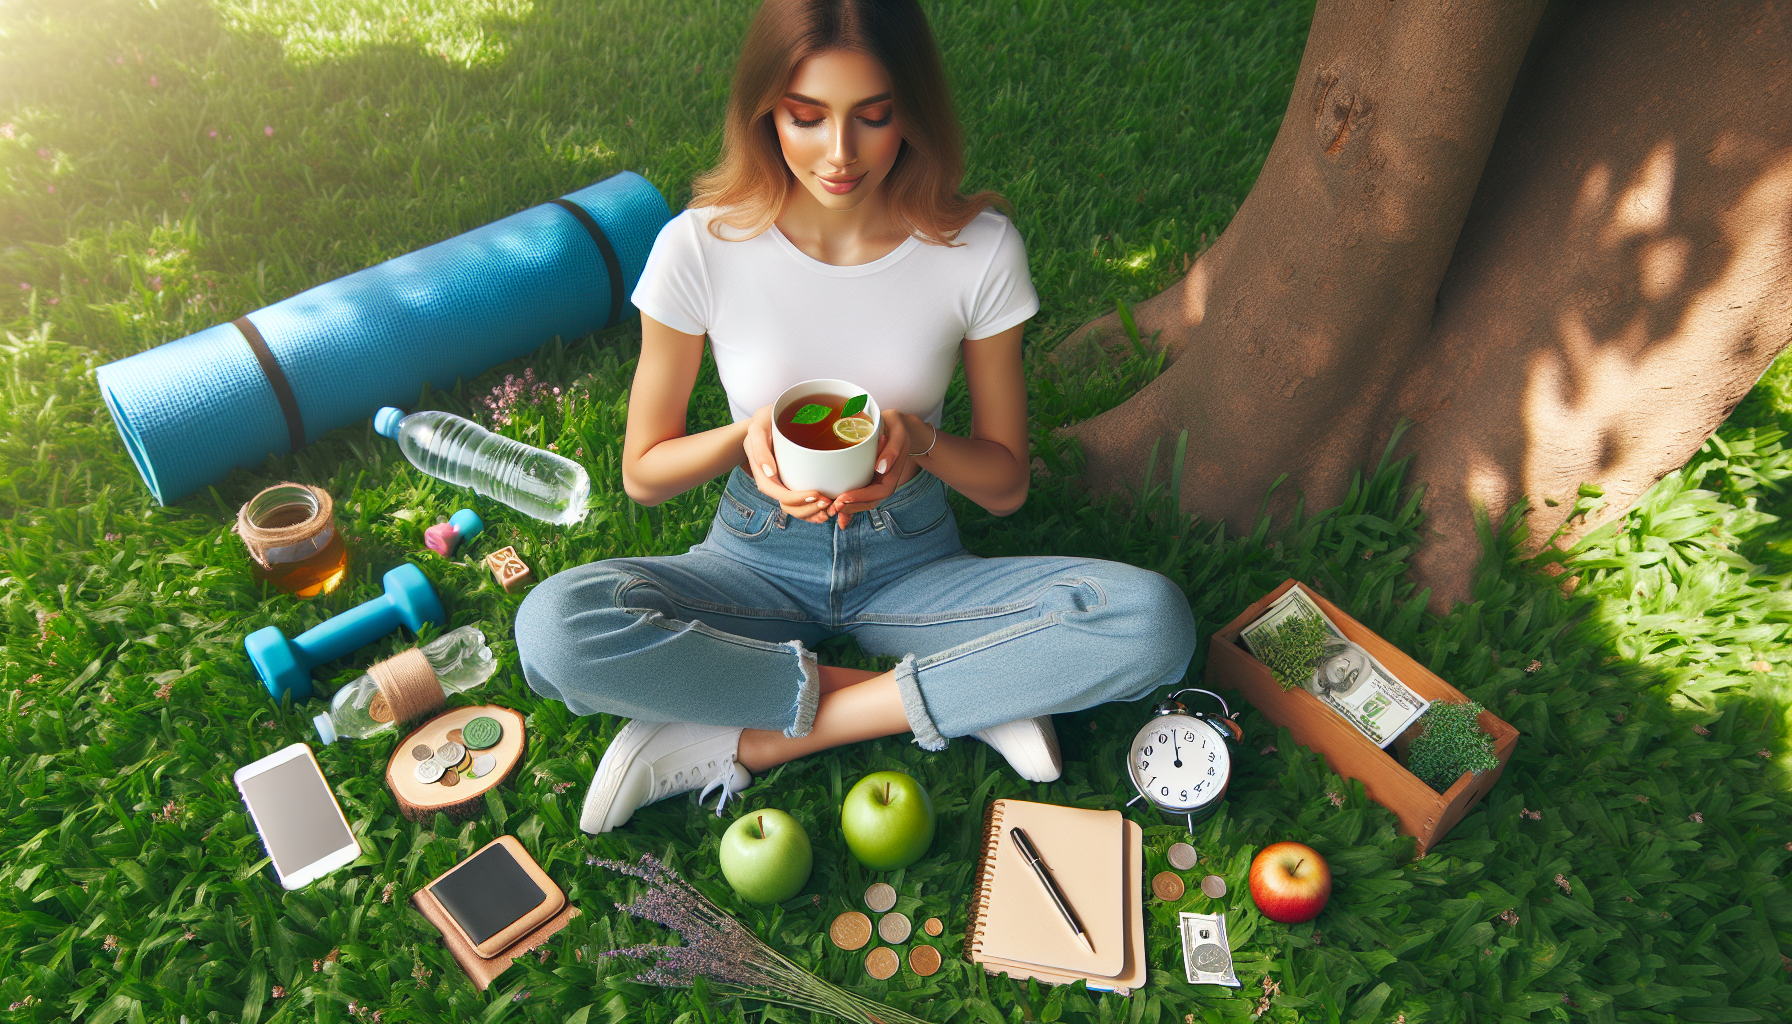 A woman sitting on the grass with food in her hands.